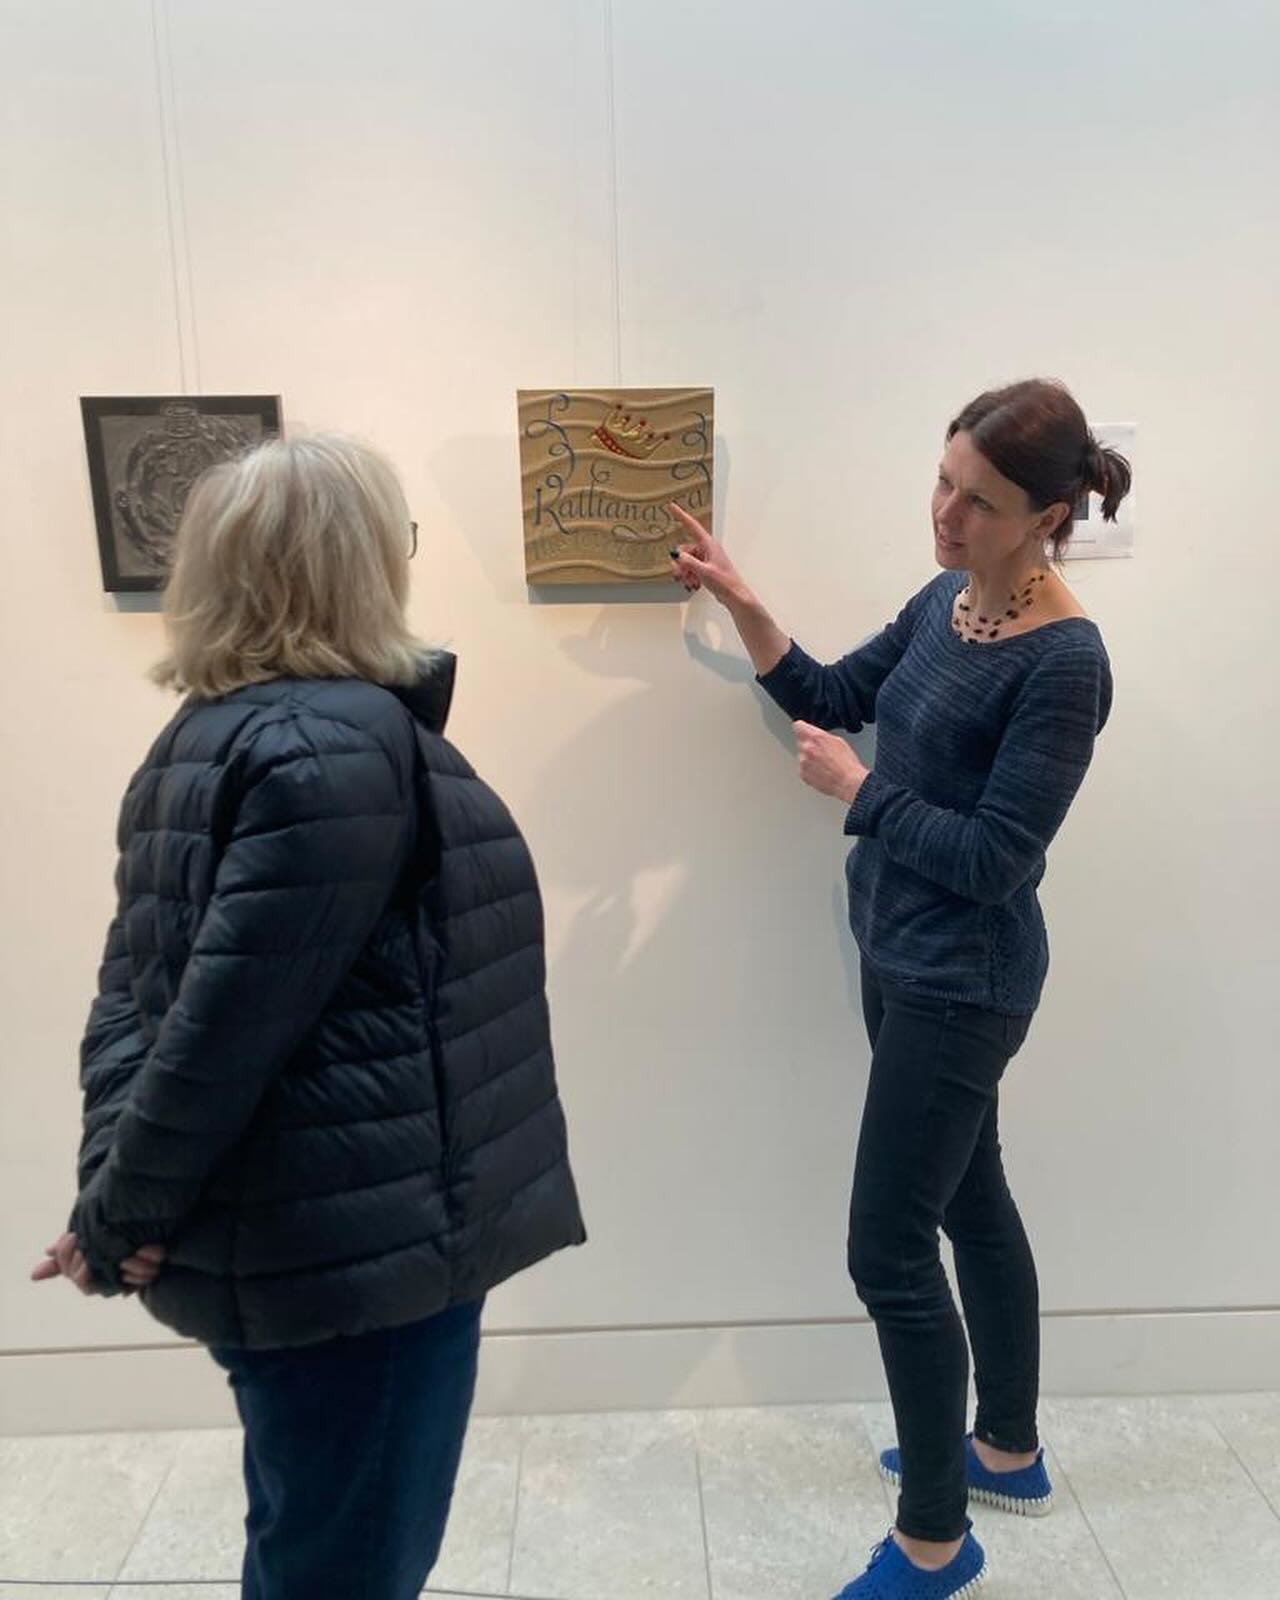 The Friends of the LAT visited Winchester on Saturday, commencing at the West Downs Gallery to see our exhibition of The Nereids.  Letter carver and former LAT journeyman, Maya Martin, was on hand to give insight into techniques and materials.  The e